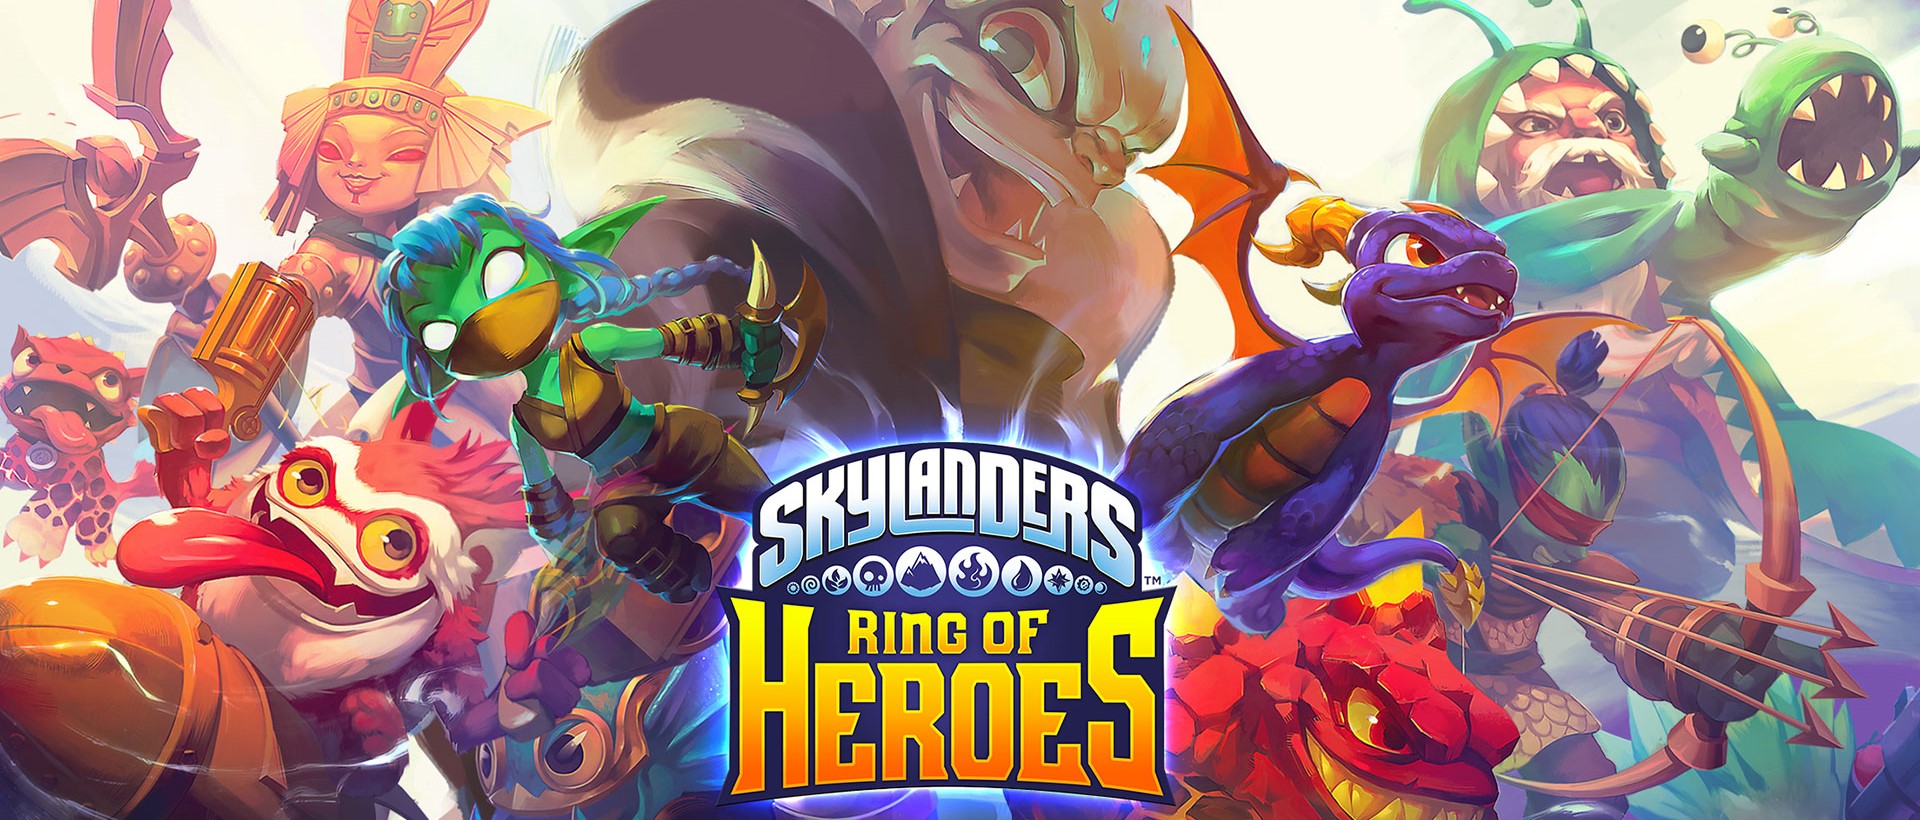 ring of heroes release date